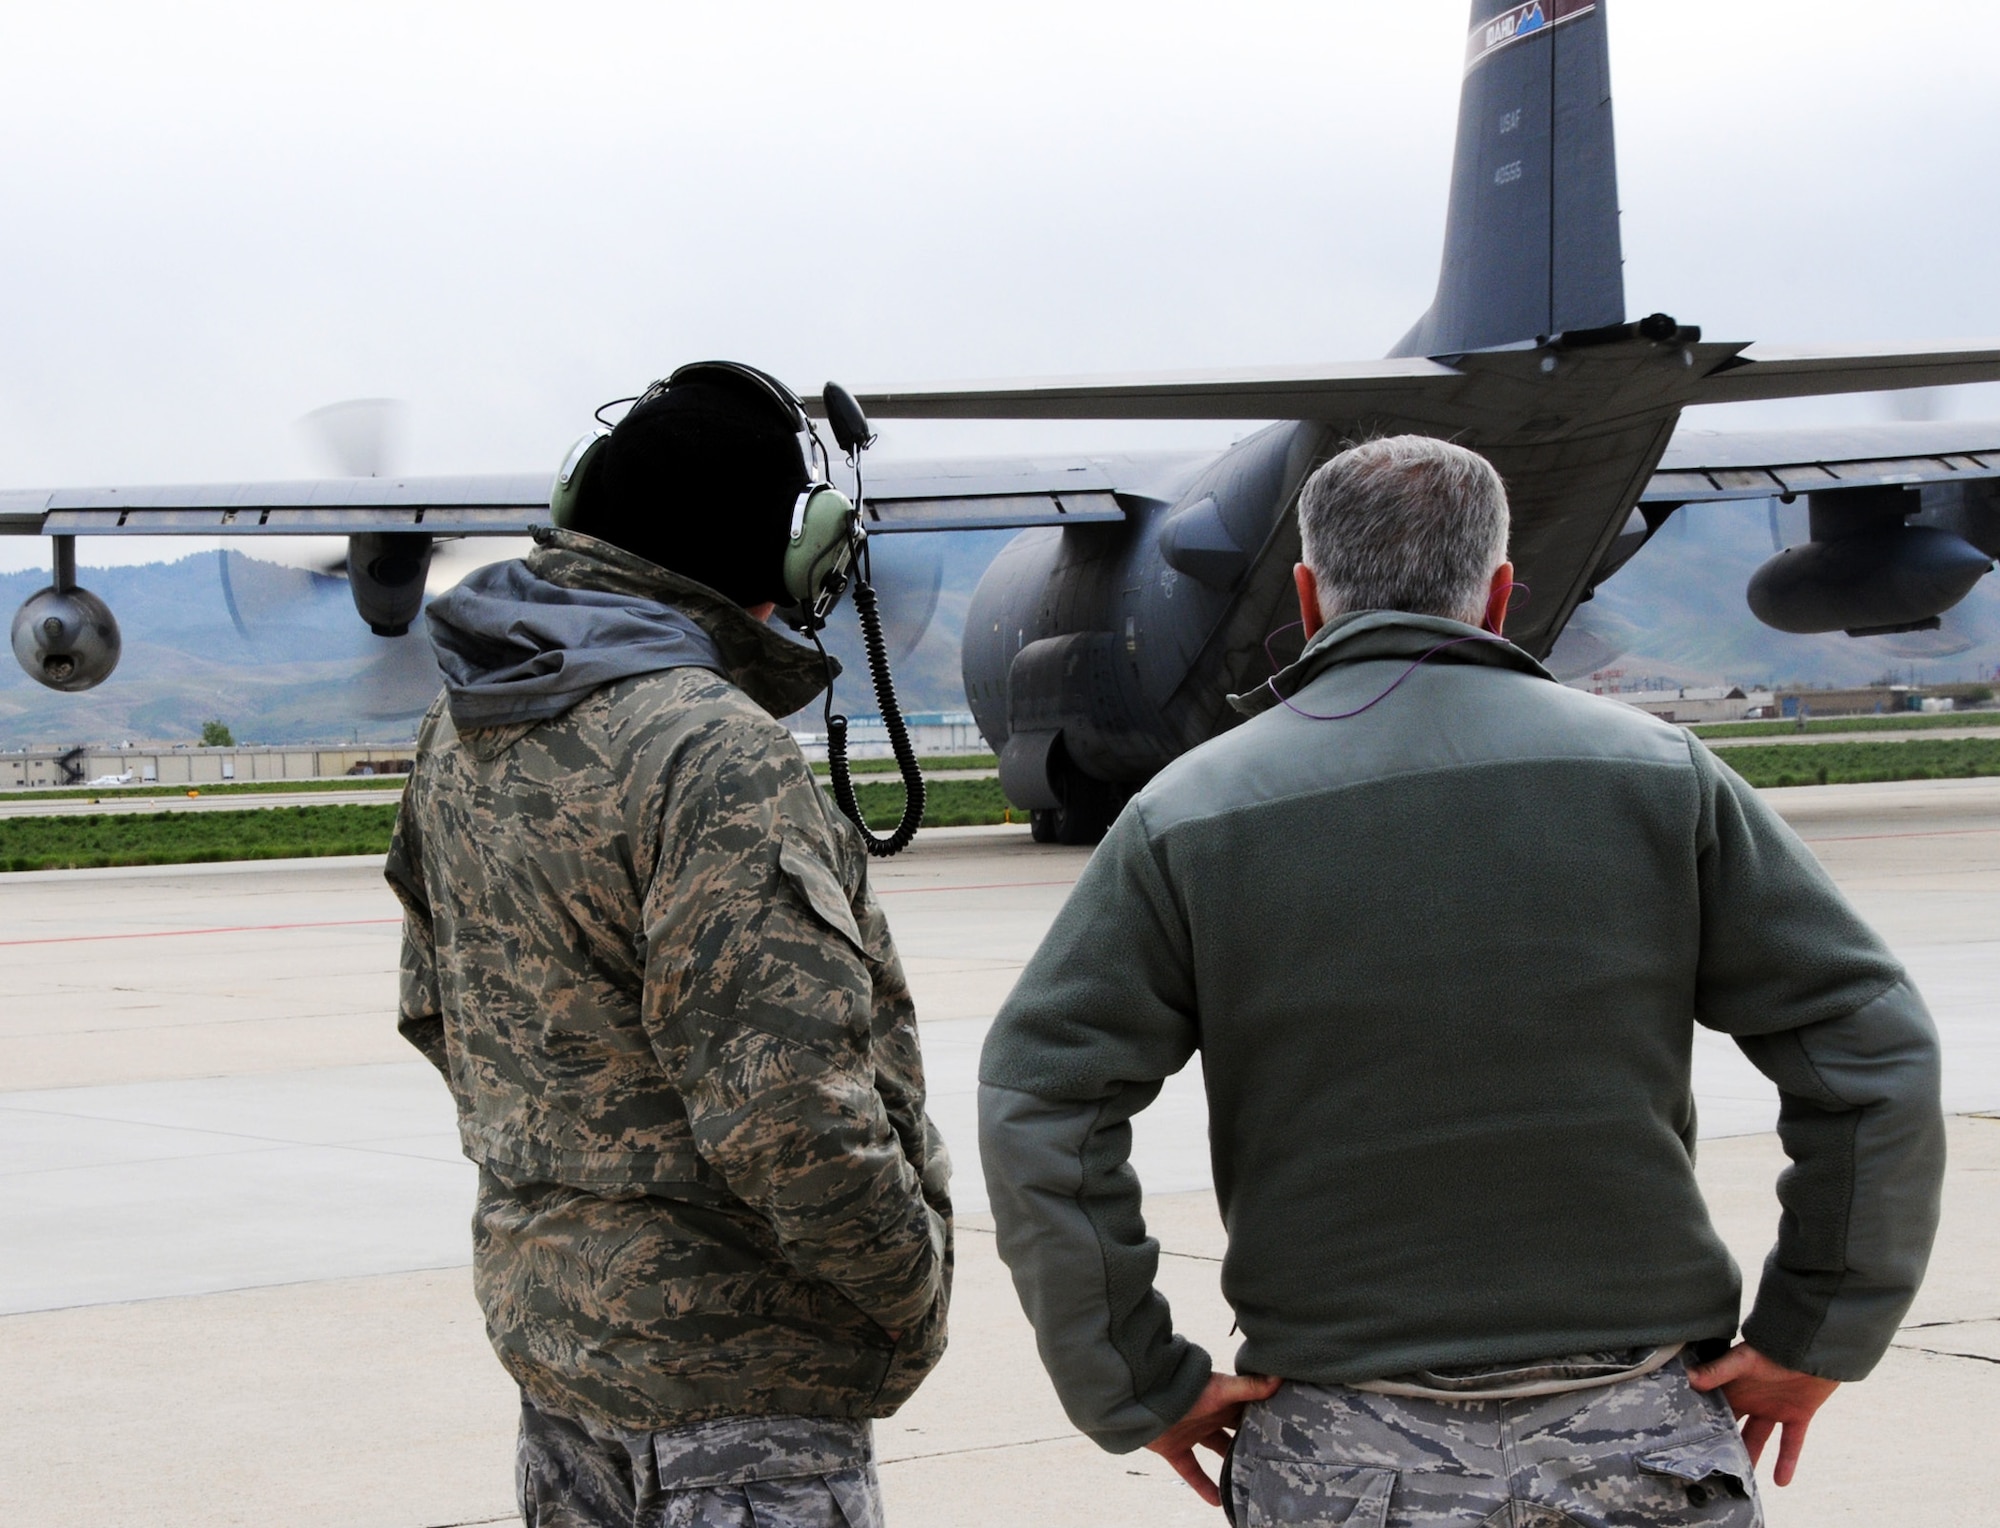 Senior Master Sgt. William McAnelly and Chief Master Sgt. Ken Potter, 919th Maintenance Group, watch as MC-130E Combat Talon #555 taxis out for the last time May 5 from Gowen Field, Idaho.  919th maintainers were sent to Boise, Idaho, to prepare four Talons to take off for one more mission – a flight into retirement and decommissioning.  Three of the Talons flew to Davis-Monthan Air Force Base, Ariz.  The other went to Hurlburt Field, Fla., to be placed in the Air Force Special Operations Command airpark.  (U.S. Air Force photo/Tech. Sgt. Samuel King Jr.)  